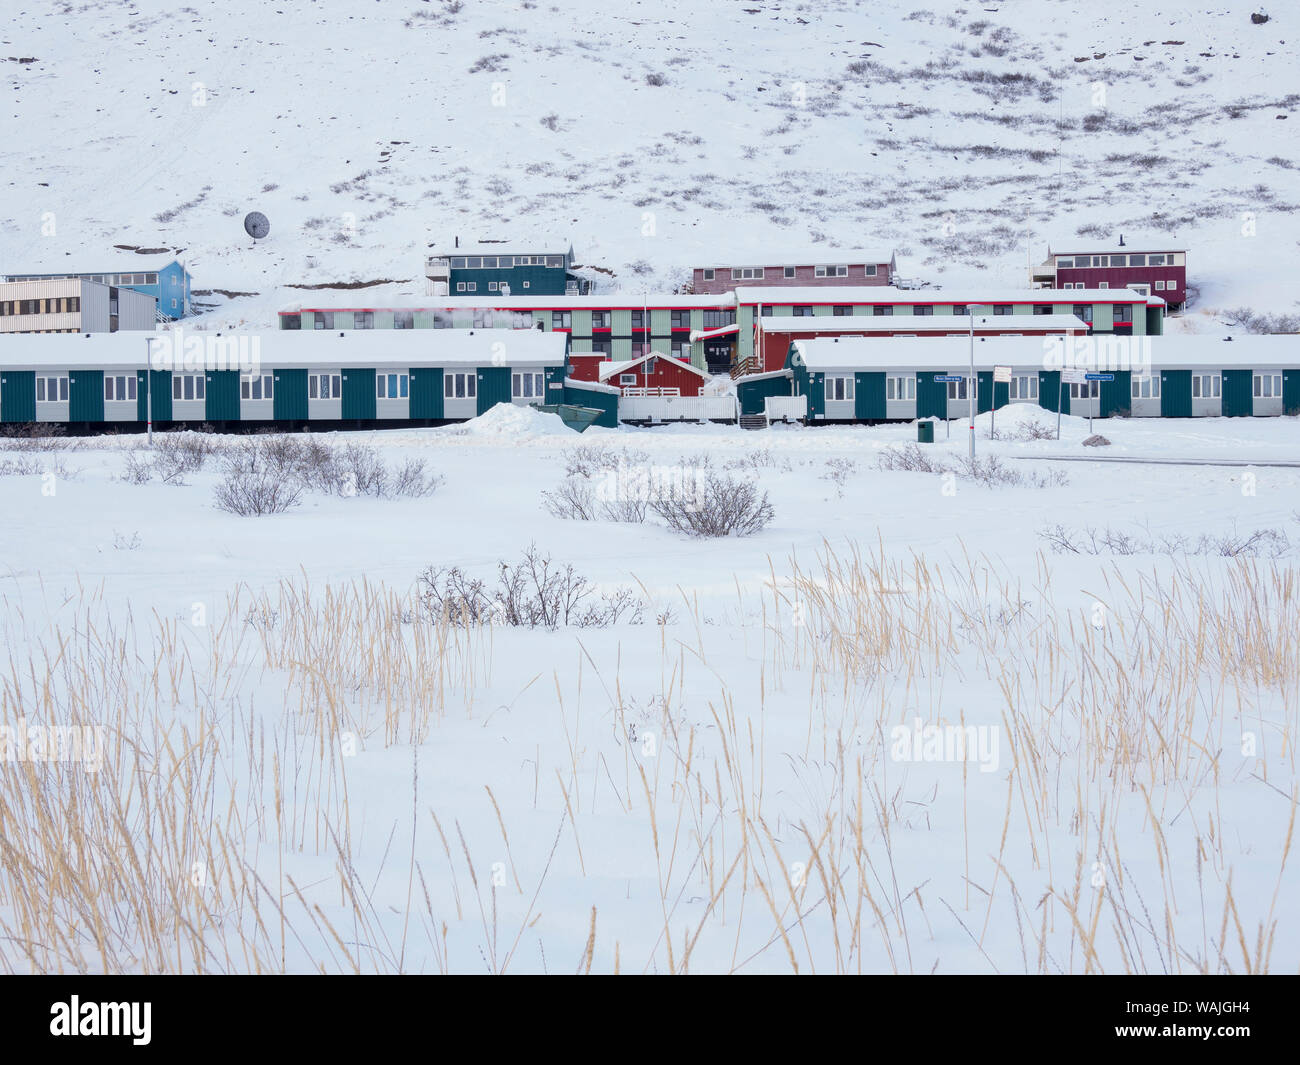 Kangerlussuaq during winter. Kangerlussuaq has the most important hub for airplanes in Greenland, Denmark. Stock Photo